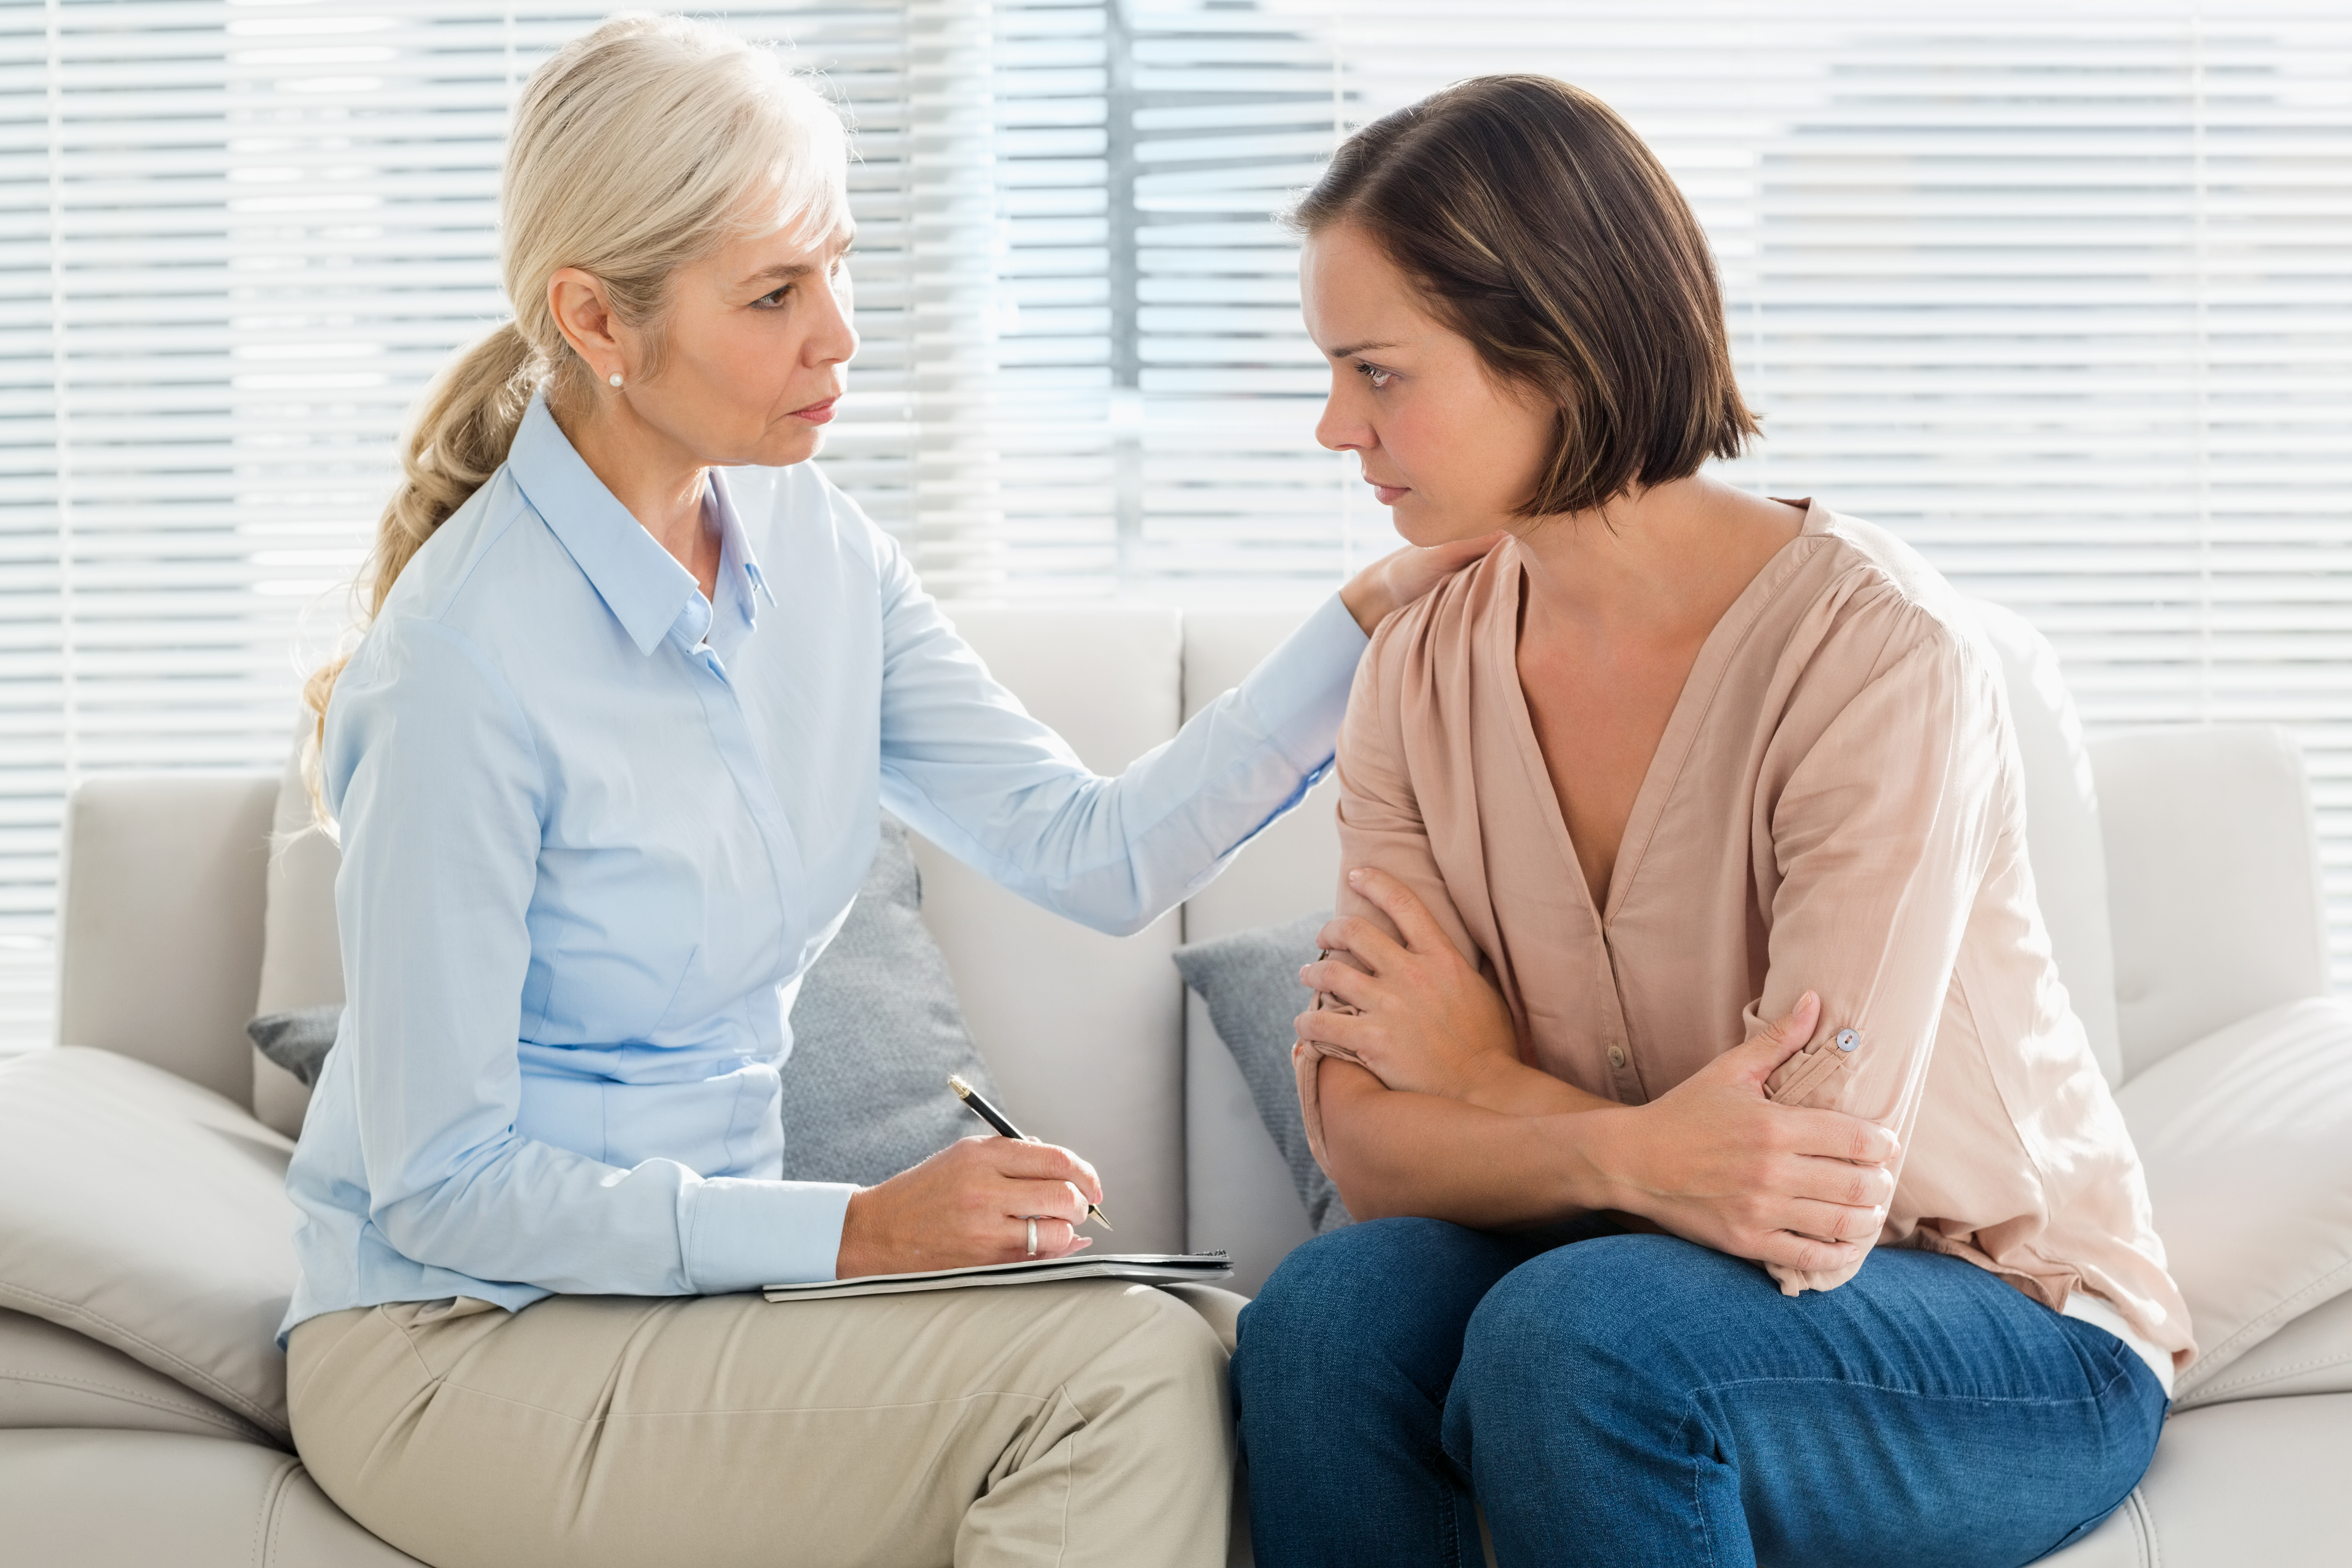 Therapist speaks to a client | Source: Getty images